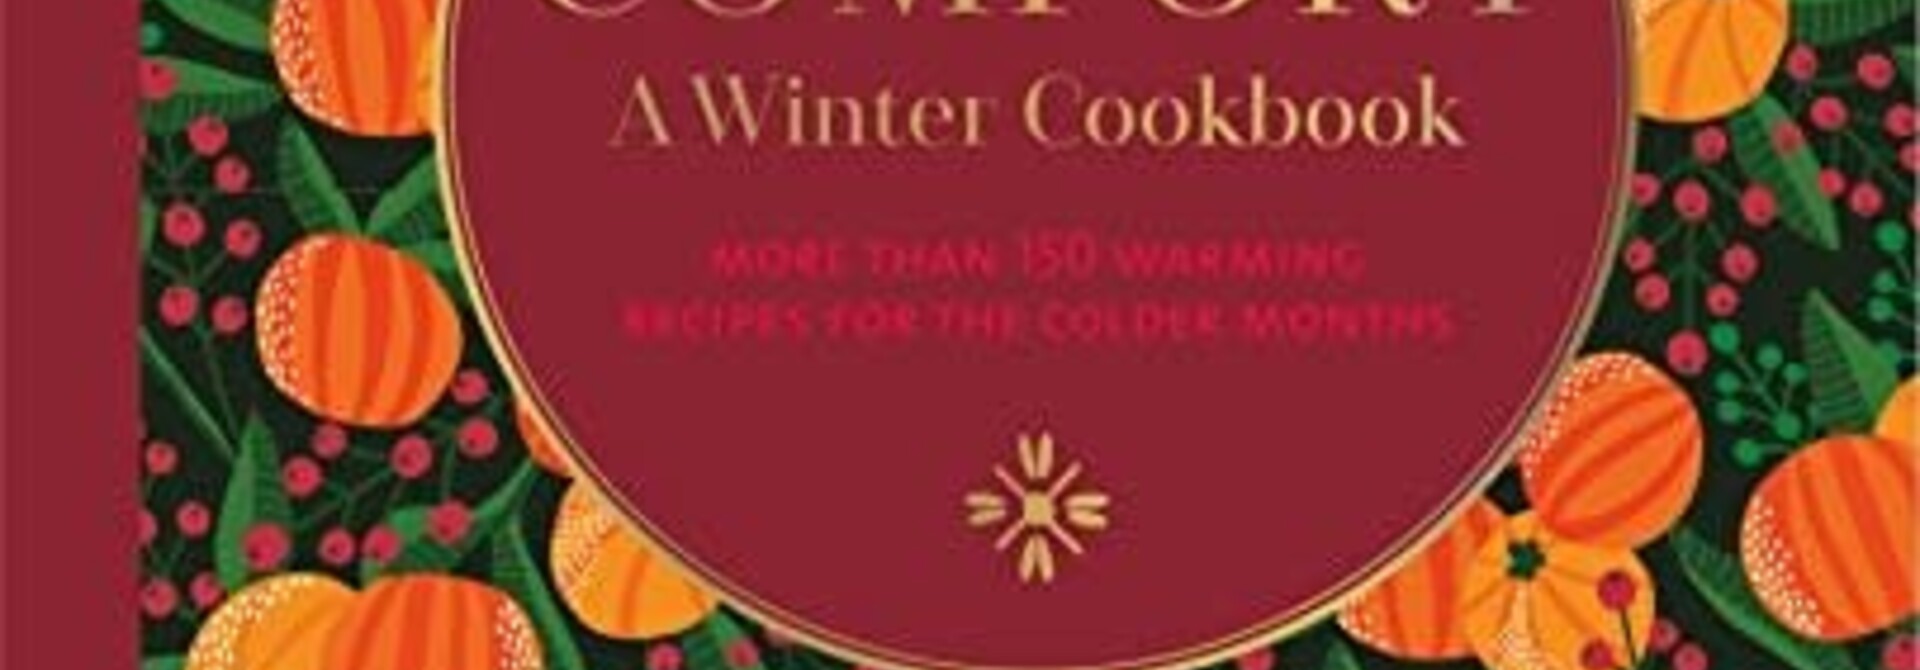 Comfort: A Winter Cookbook | The Cookbook Collection